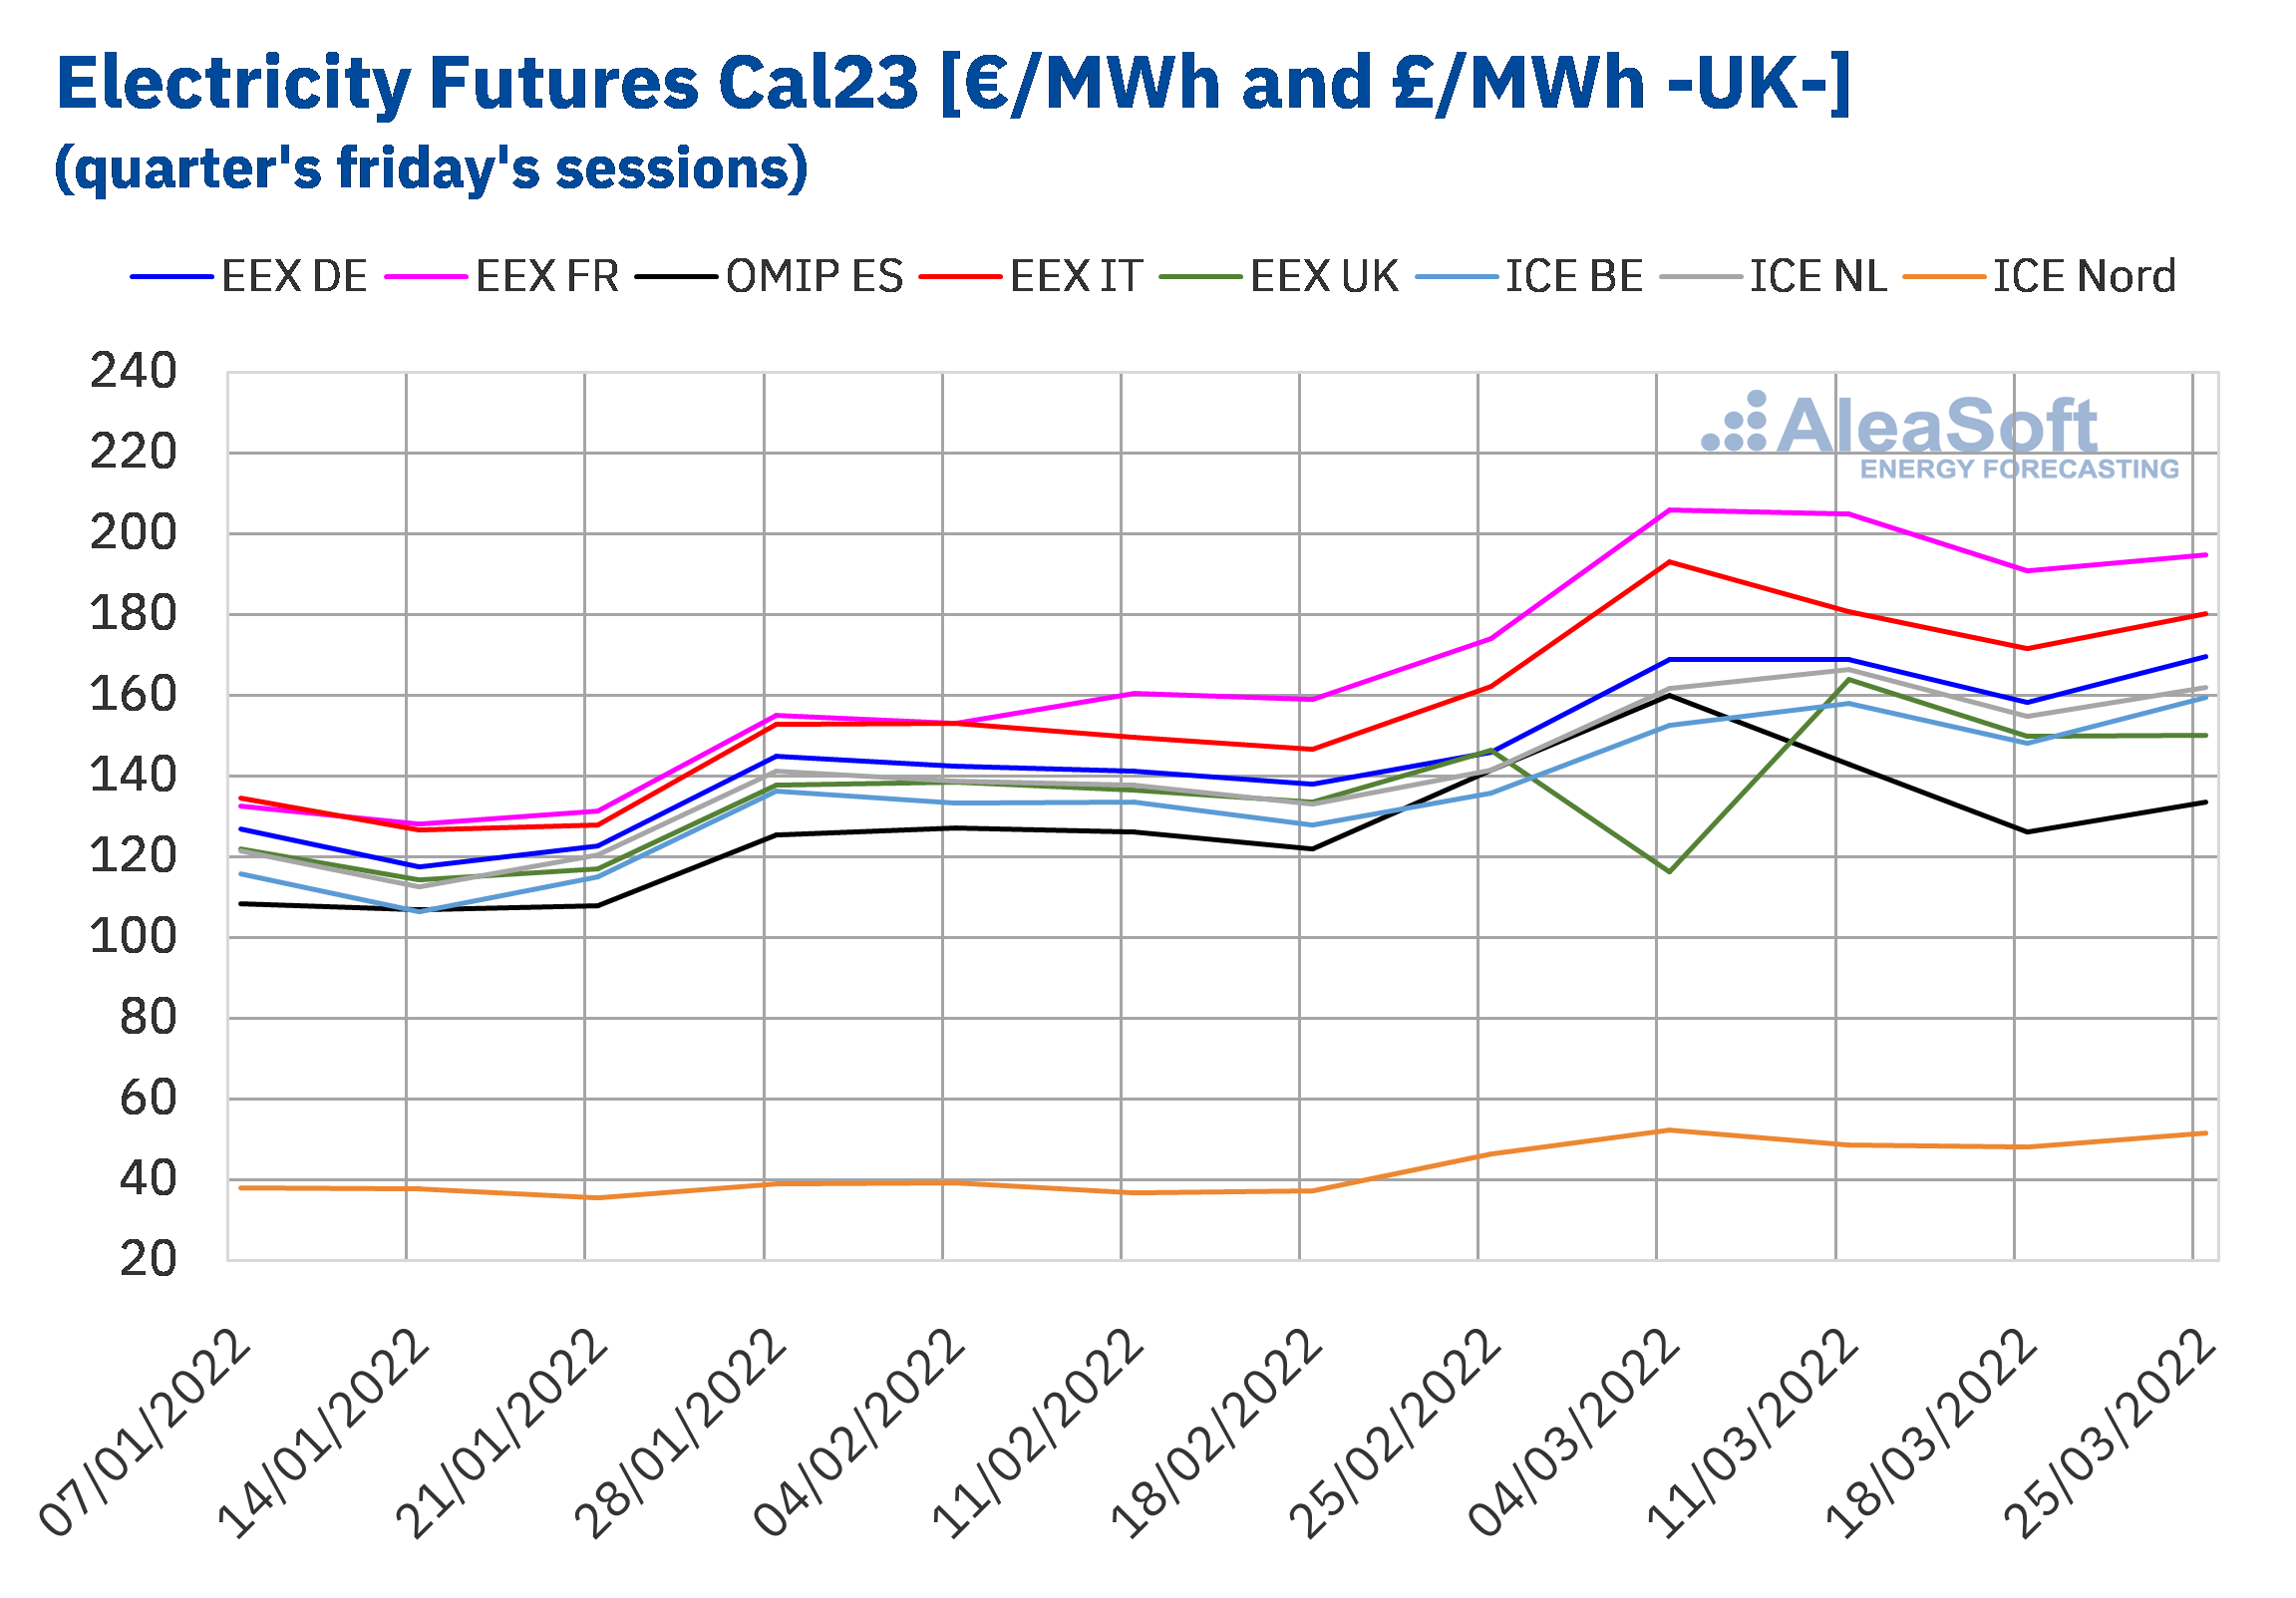 AleaSoft - Cal23 electricity futures prices Q1 2022